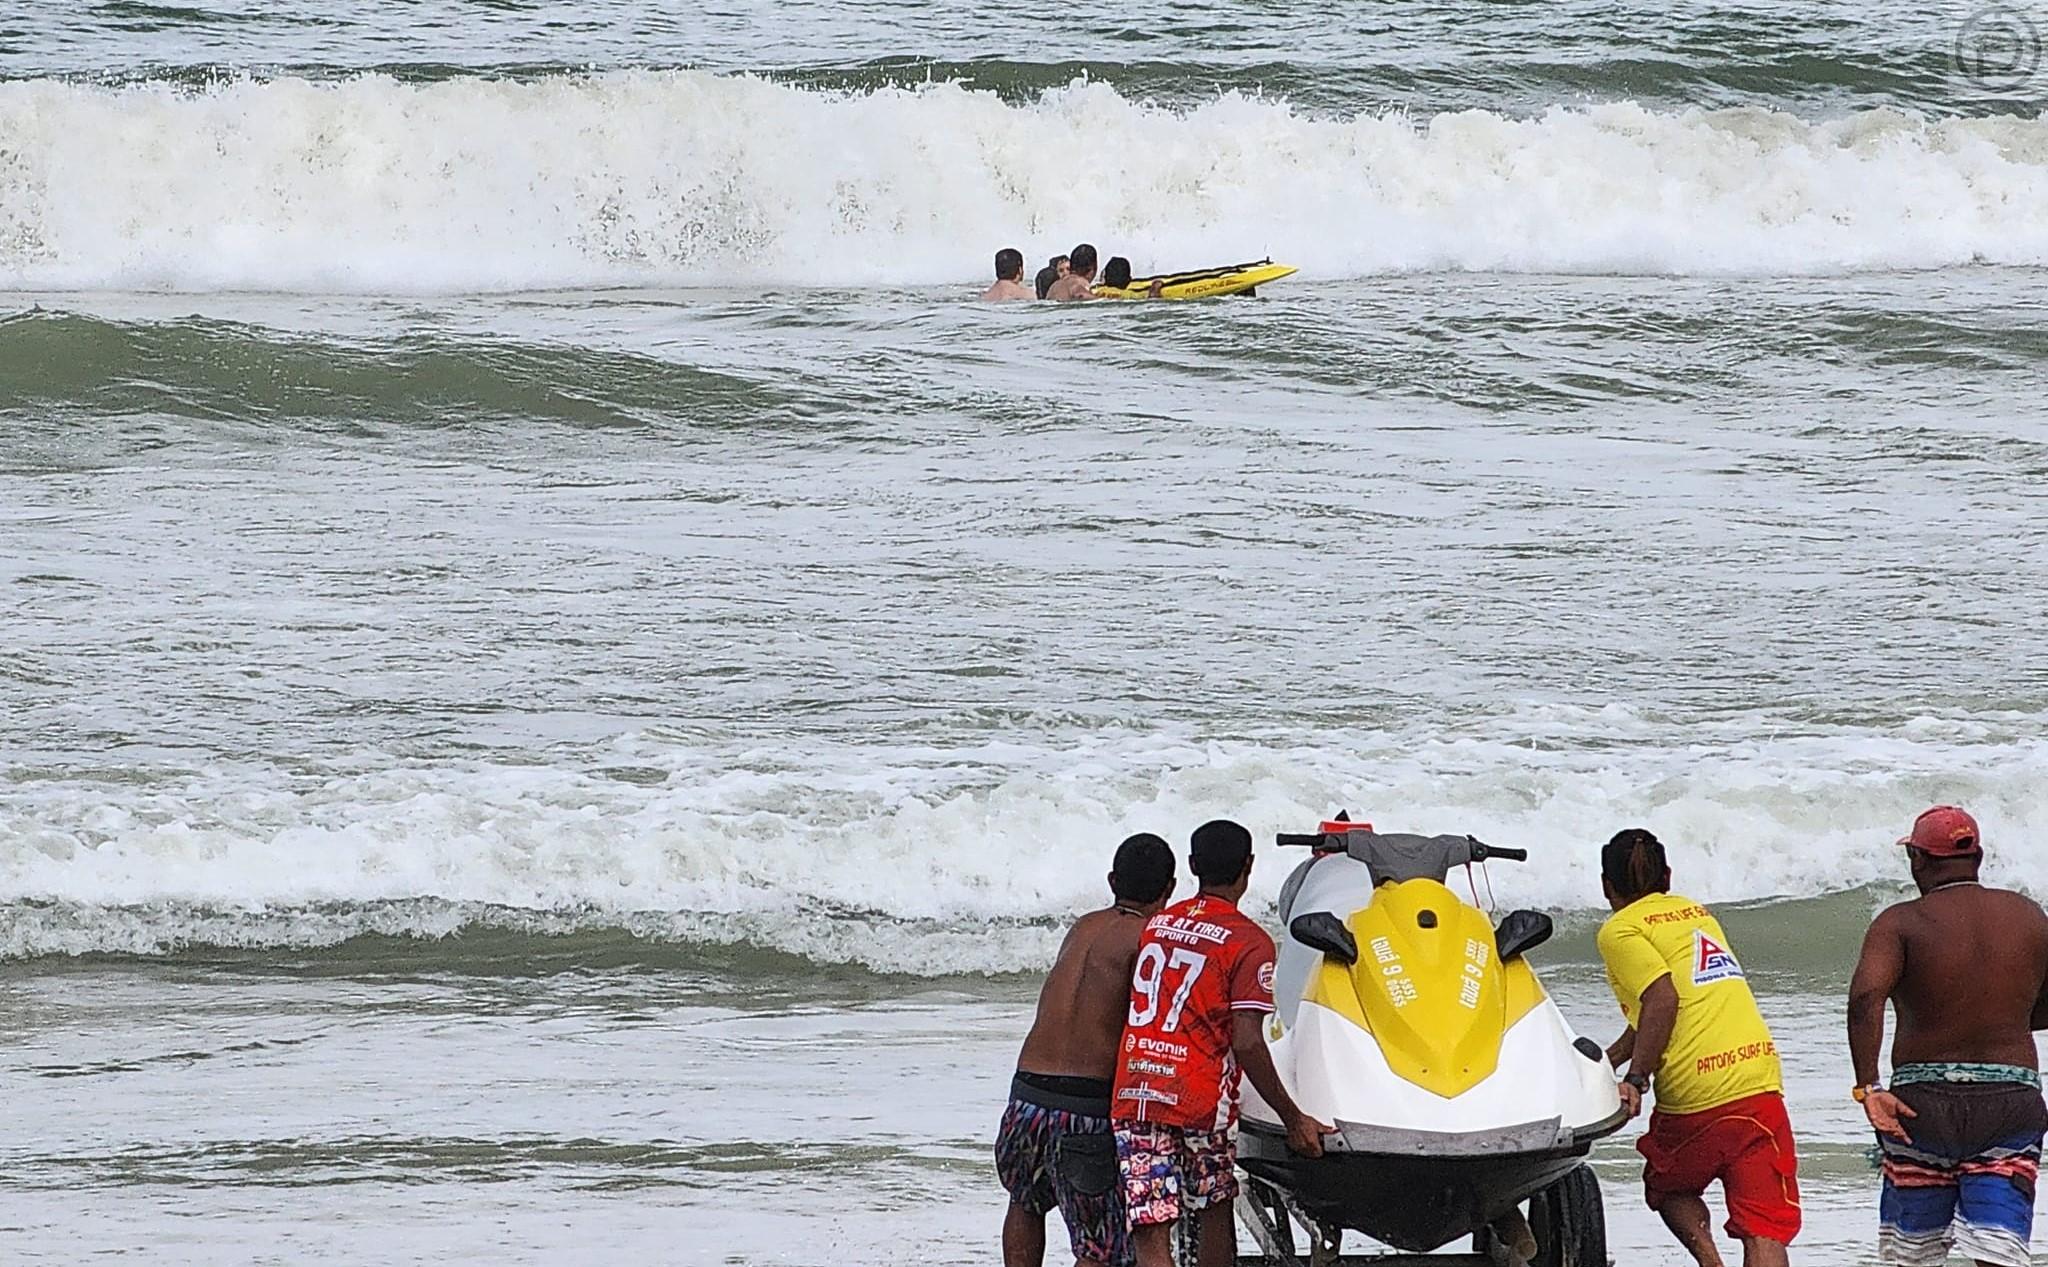 Phuket Thailand Sees 4 Tourists Dead From Drowning in Only 5 Days